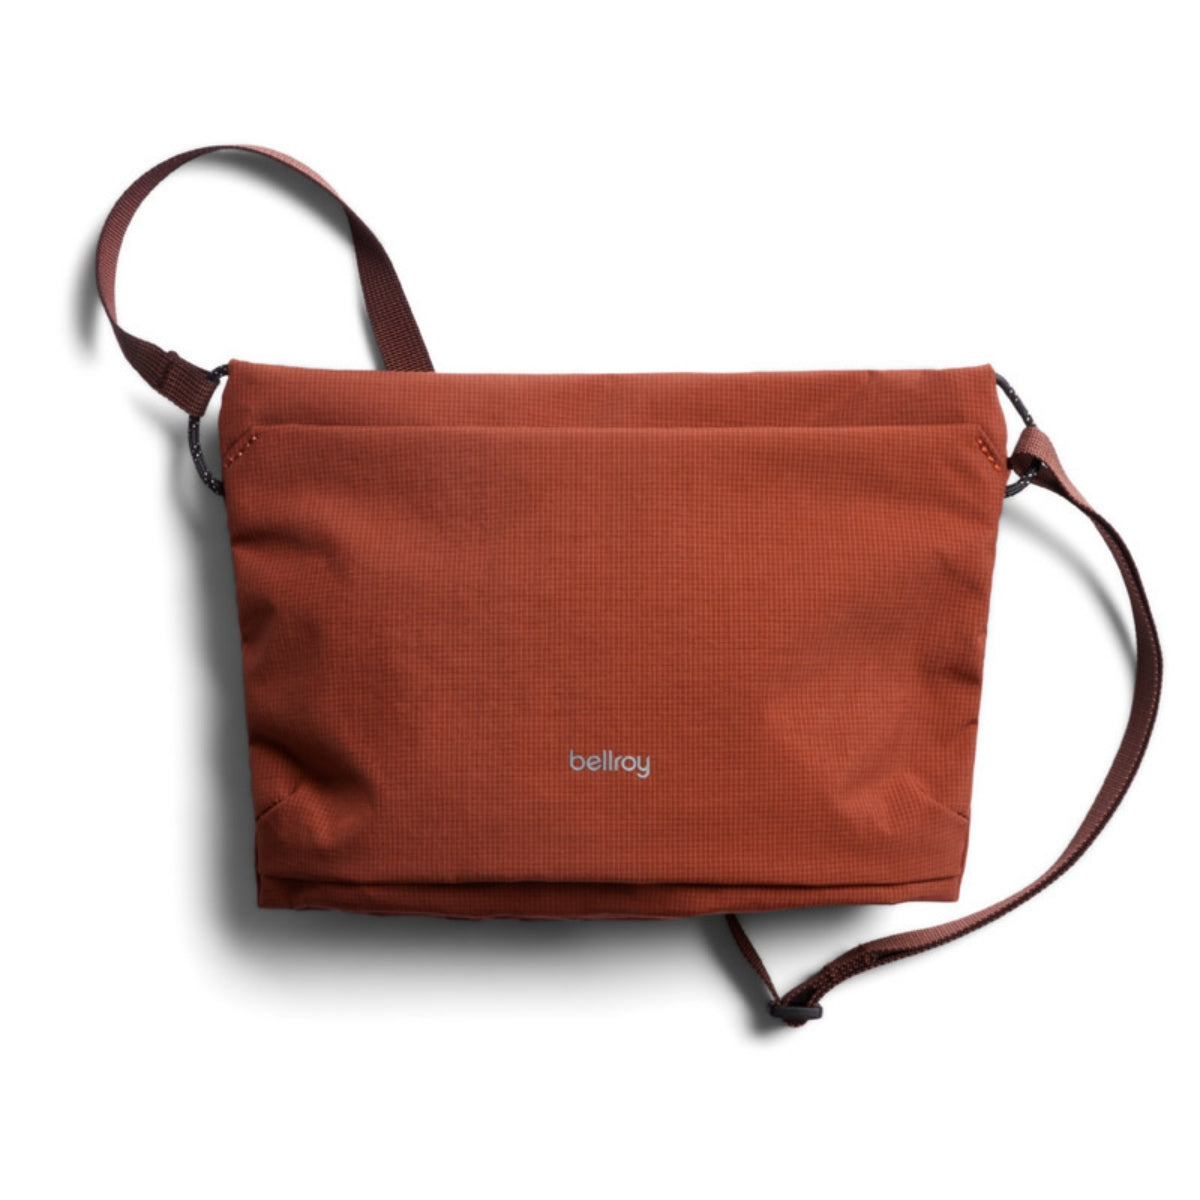 Bellroy Lite Sacoche in Clay